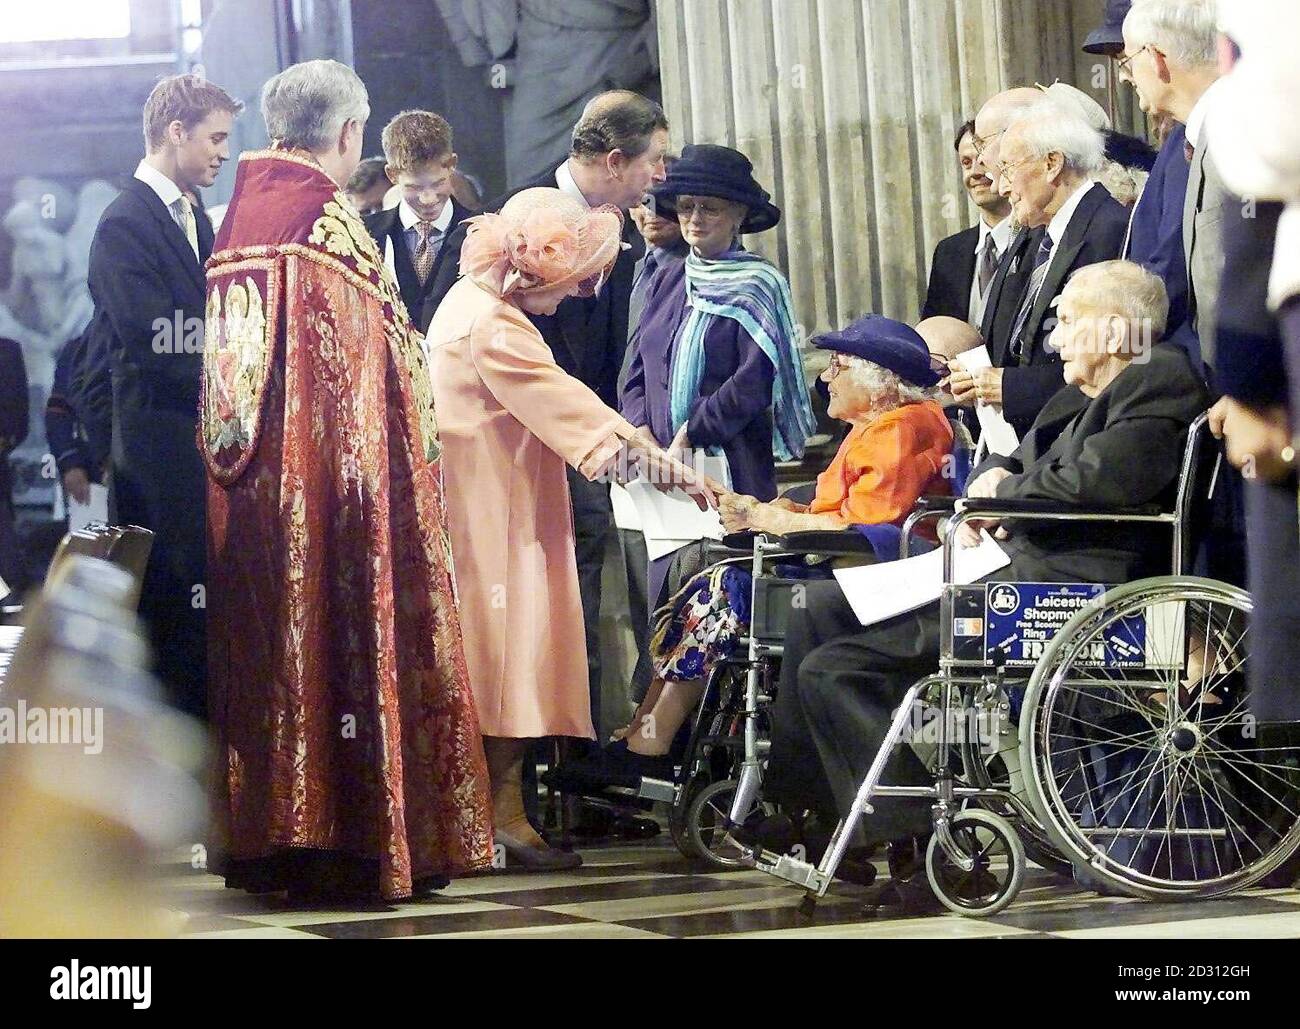 The Queen Mother at St Paul's Cathedral for the service of thanksgiving Tuesday July 11, 2000, to commemorate her 100th birthday  on 4/8/00. Stock Photo